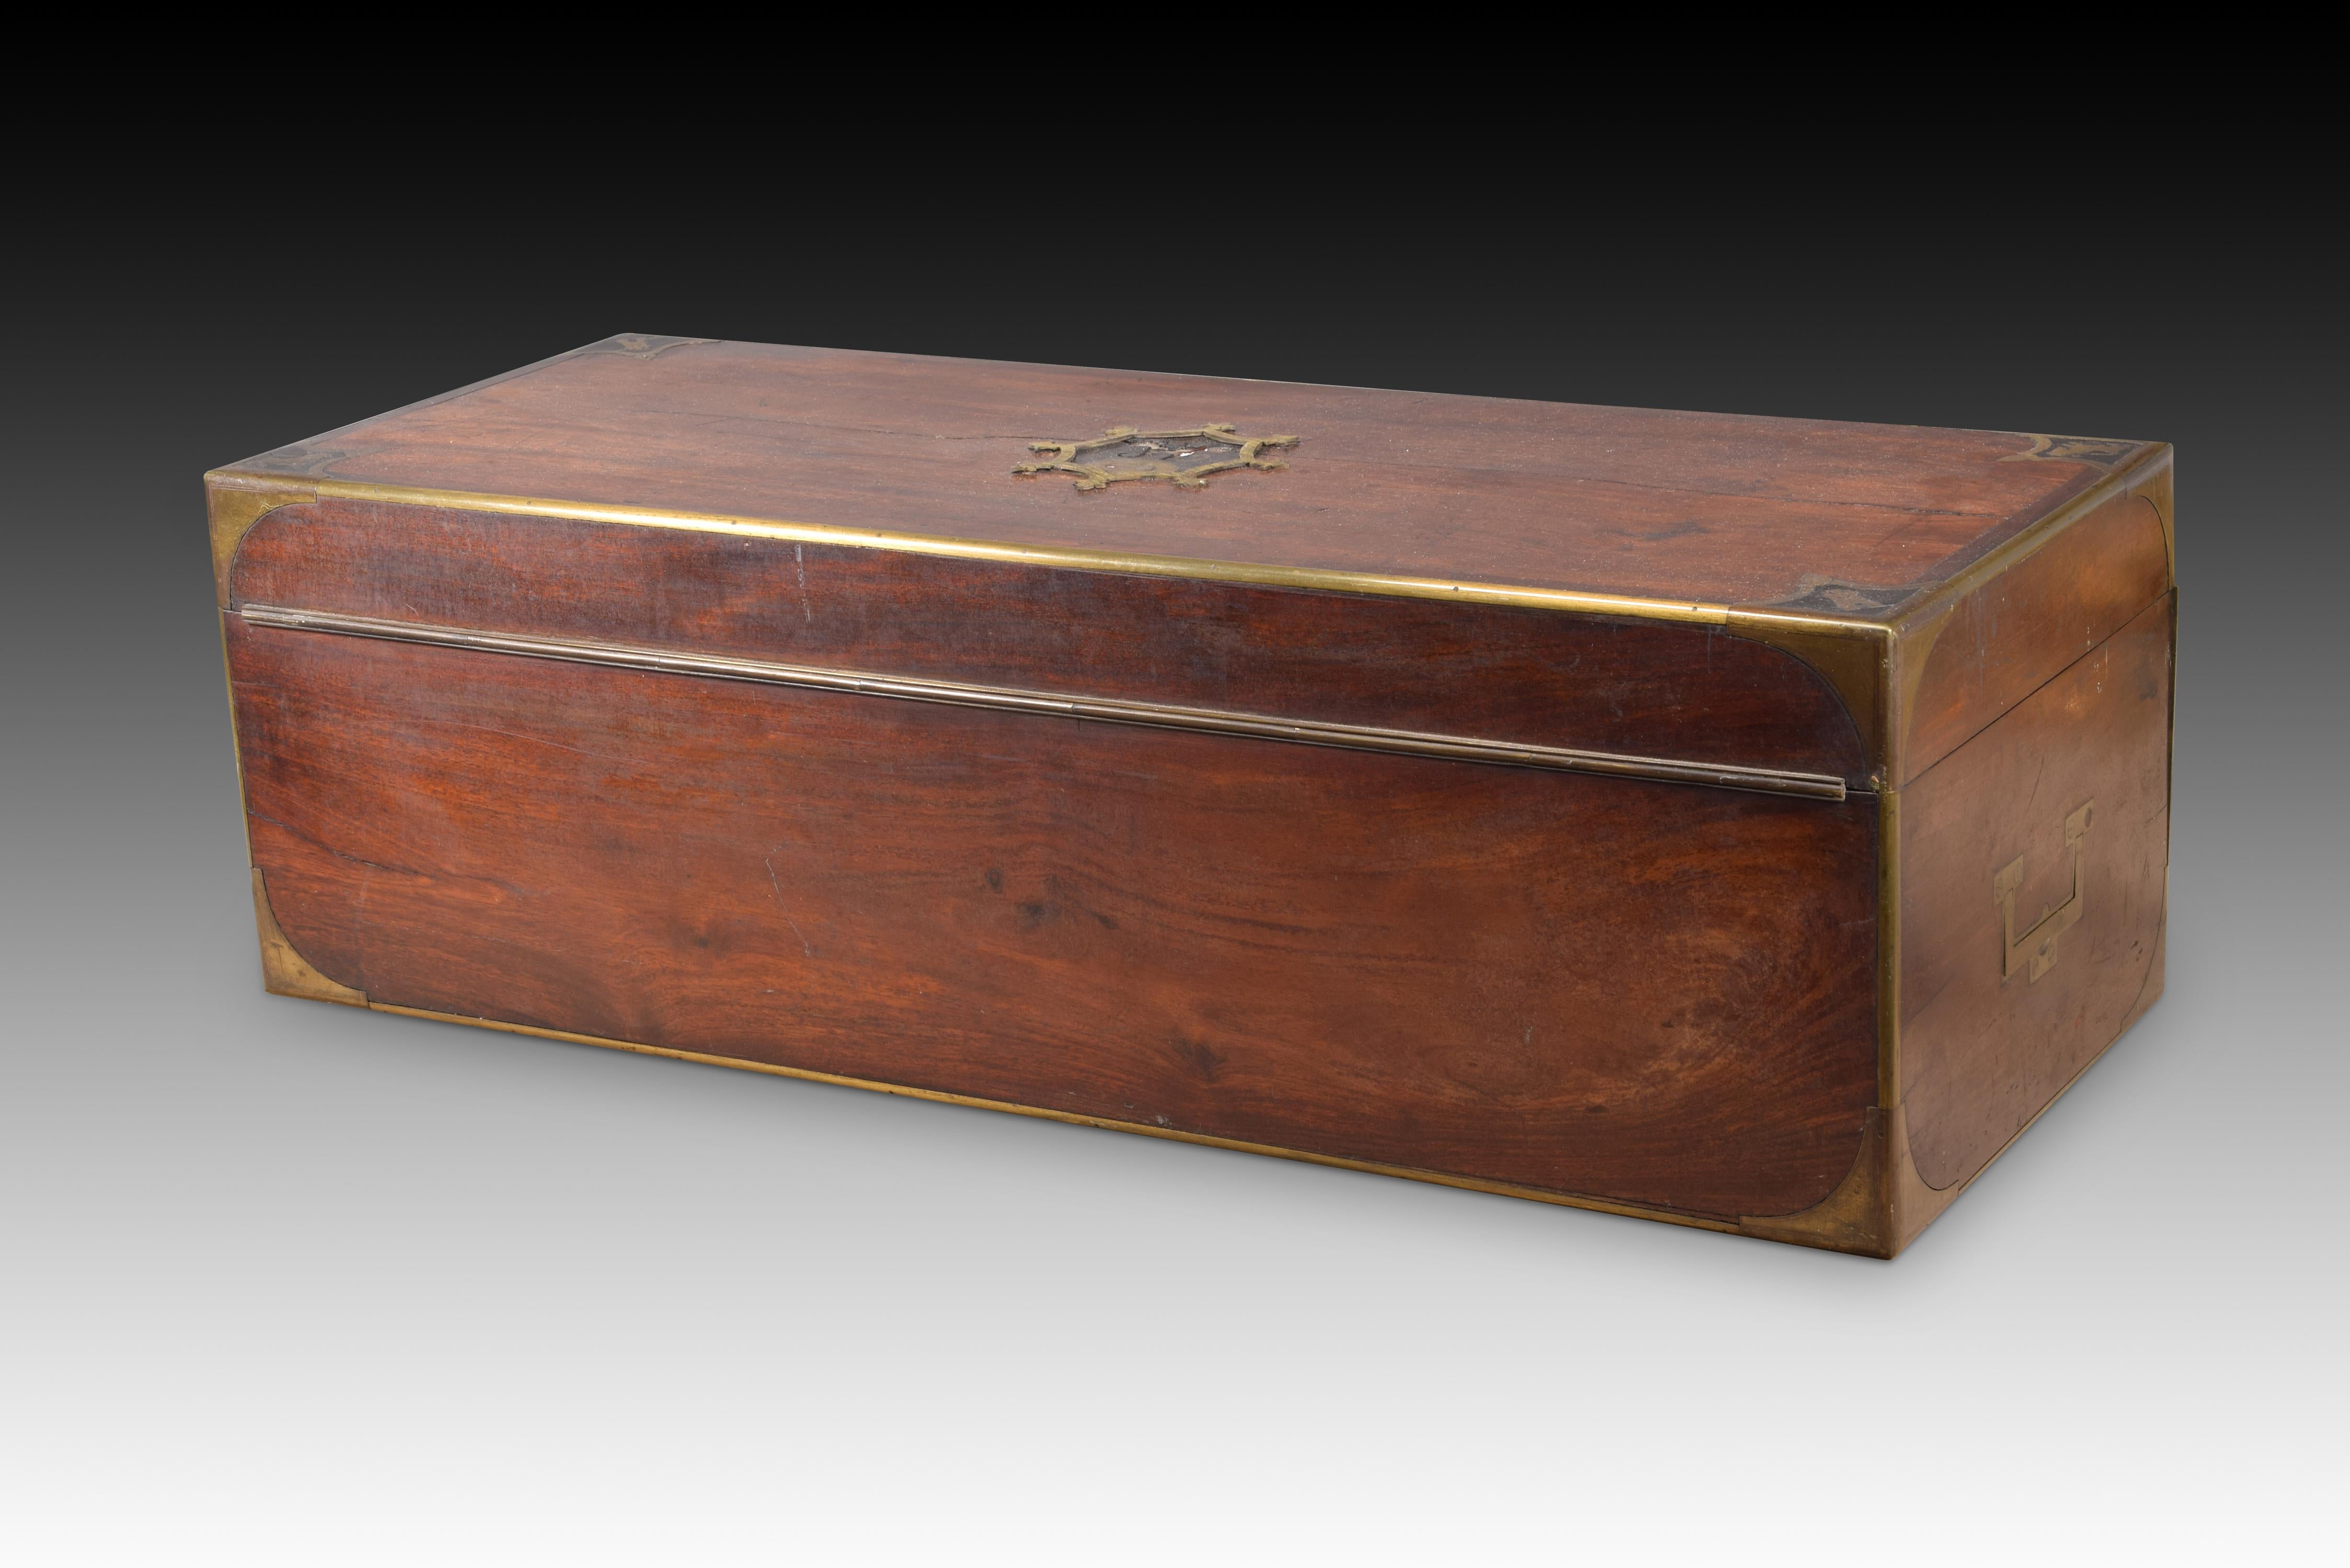 Neoclassical Revival Box or casket with royal monogram. Mahogany wood, metal. Spain, 19th century. For Sale